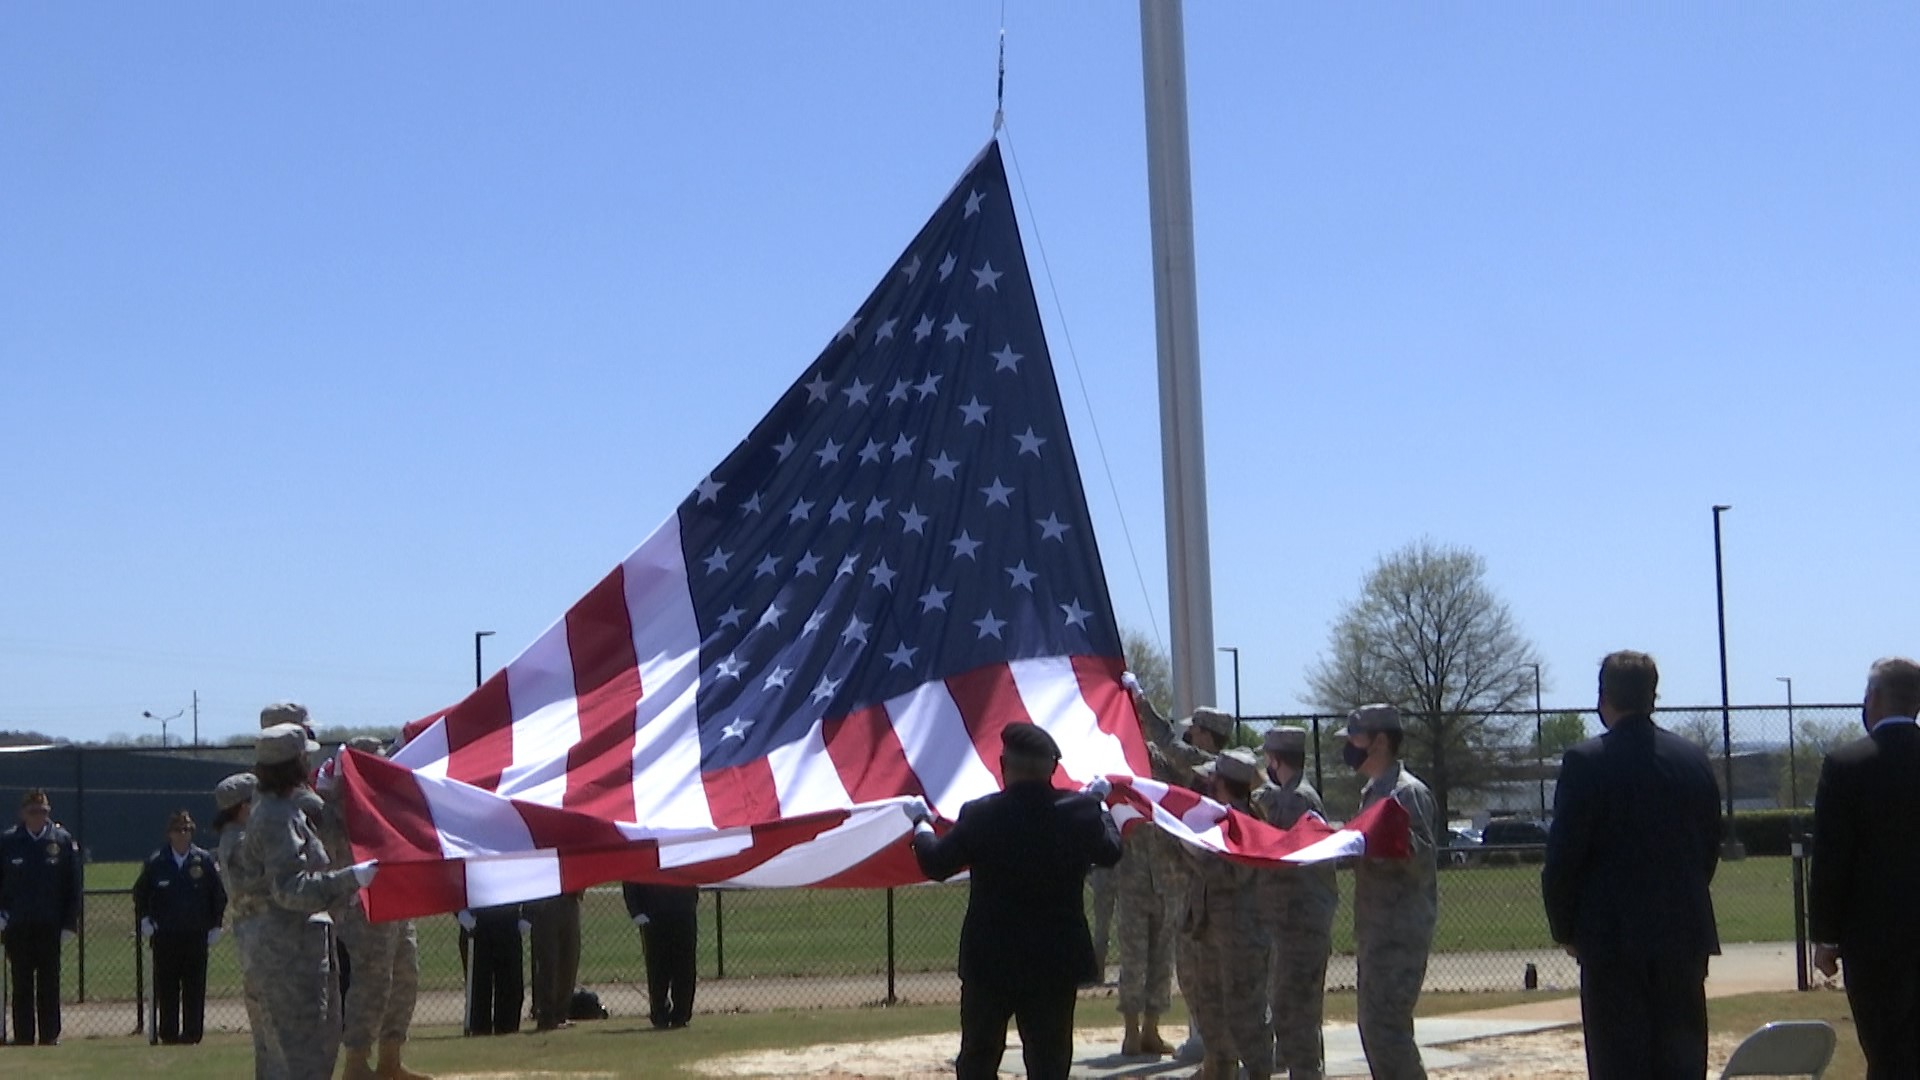 Madison City Schools held a dedication ceremony and christening of its new flagpole. It flies 60 feet high, at the Madison City Stadium.